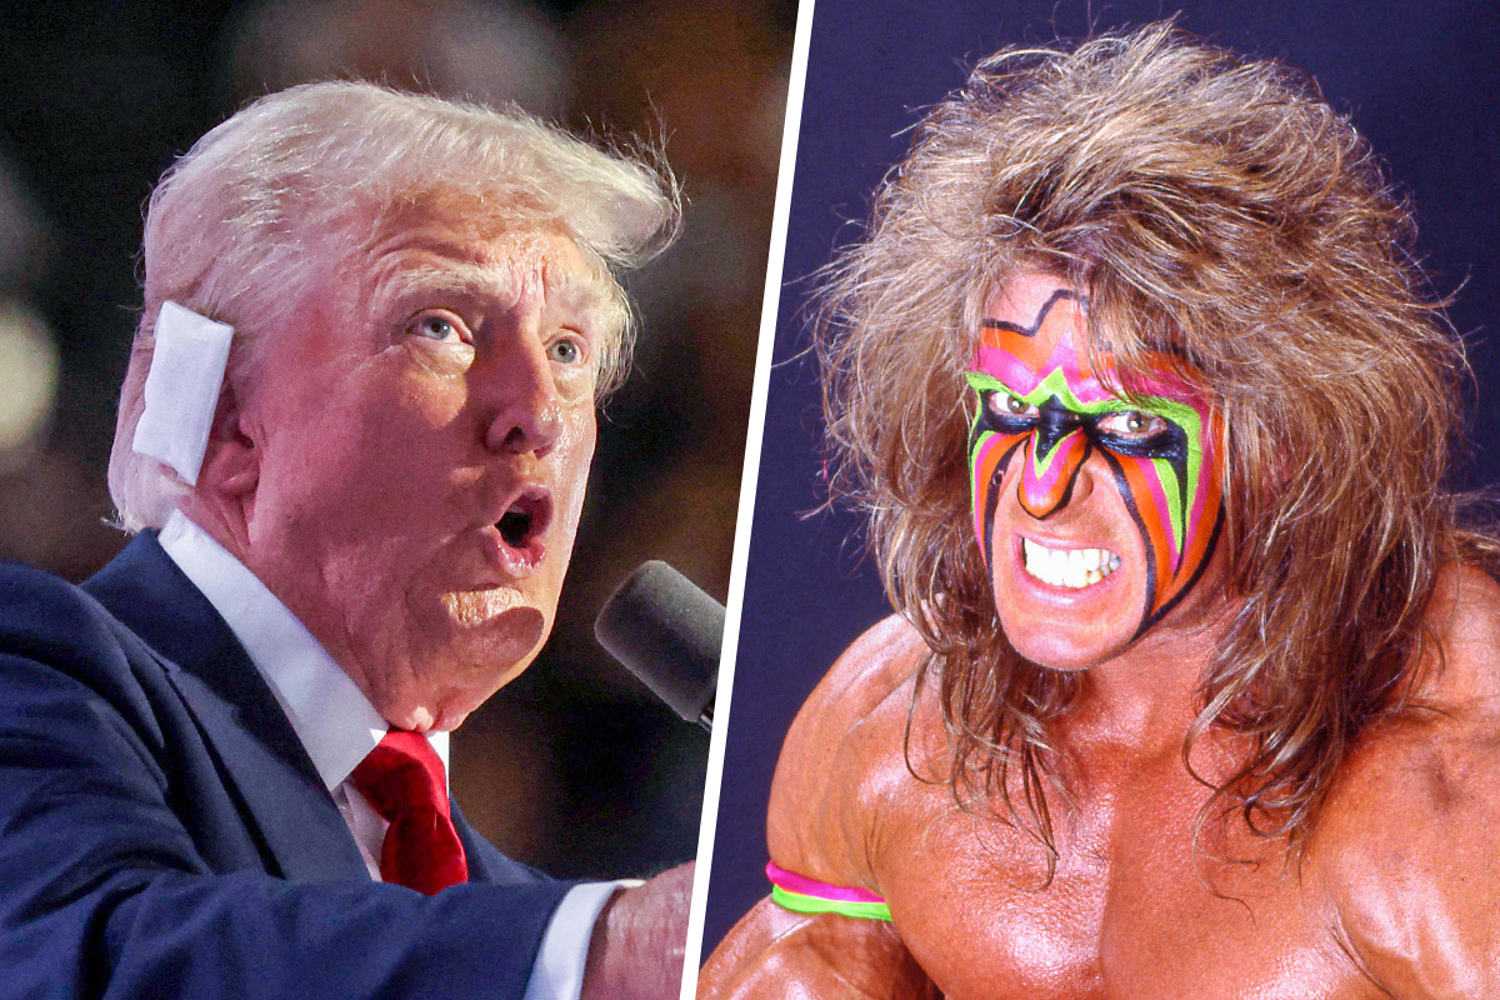 At a WWE-infused RNC, Trump seemed like a washed-up wrestler